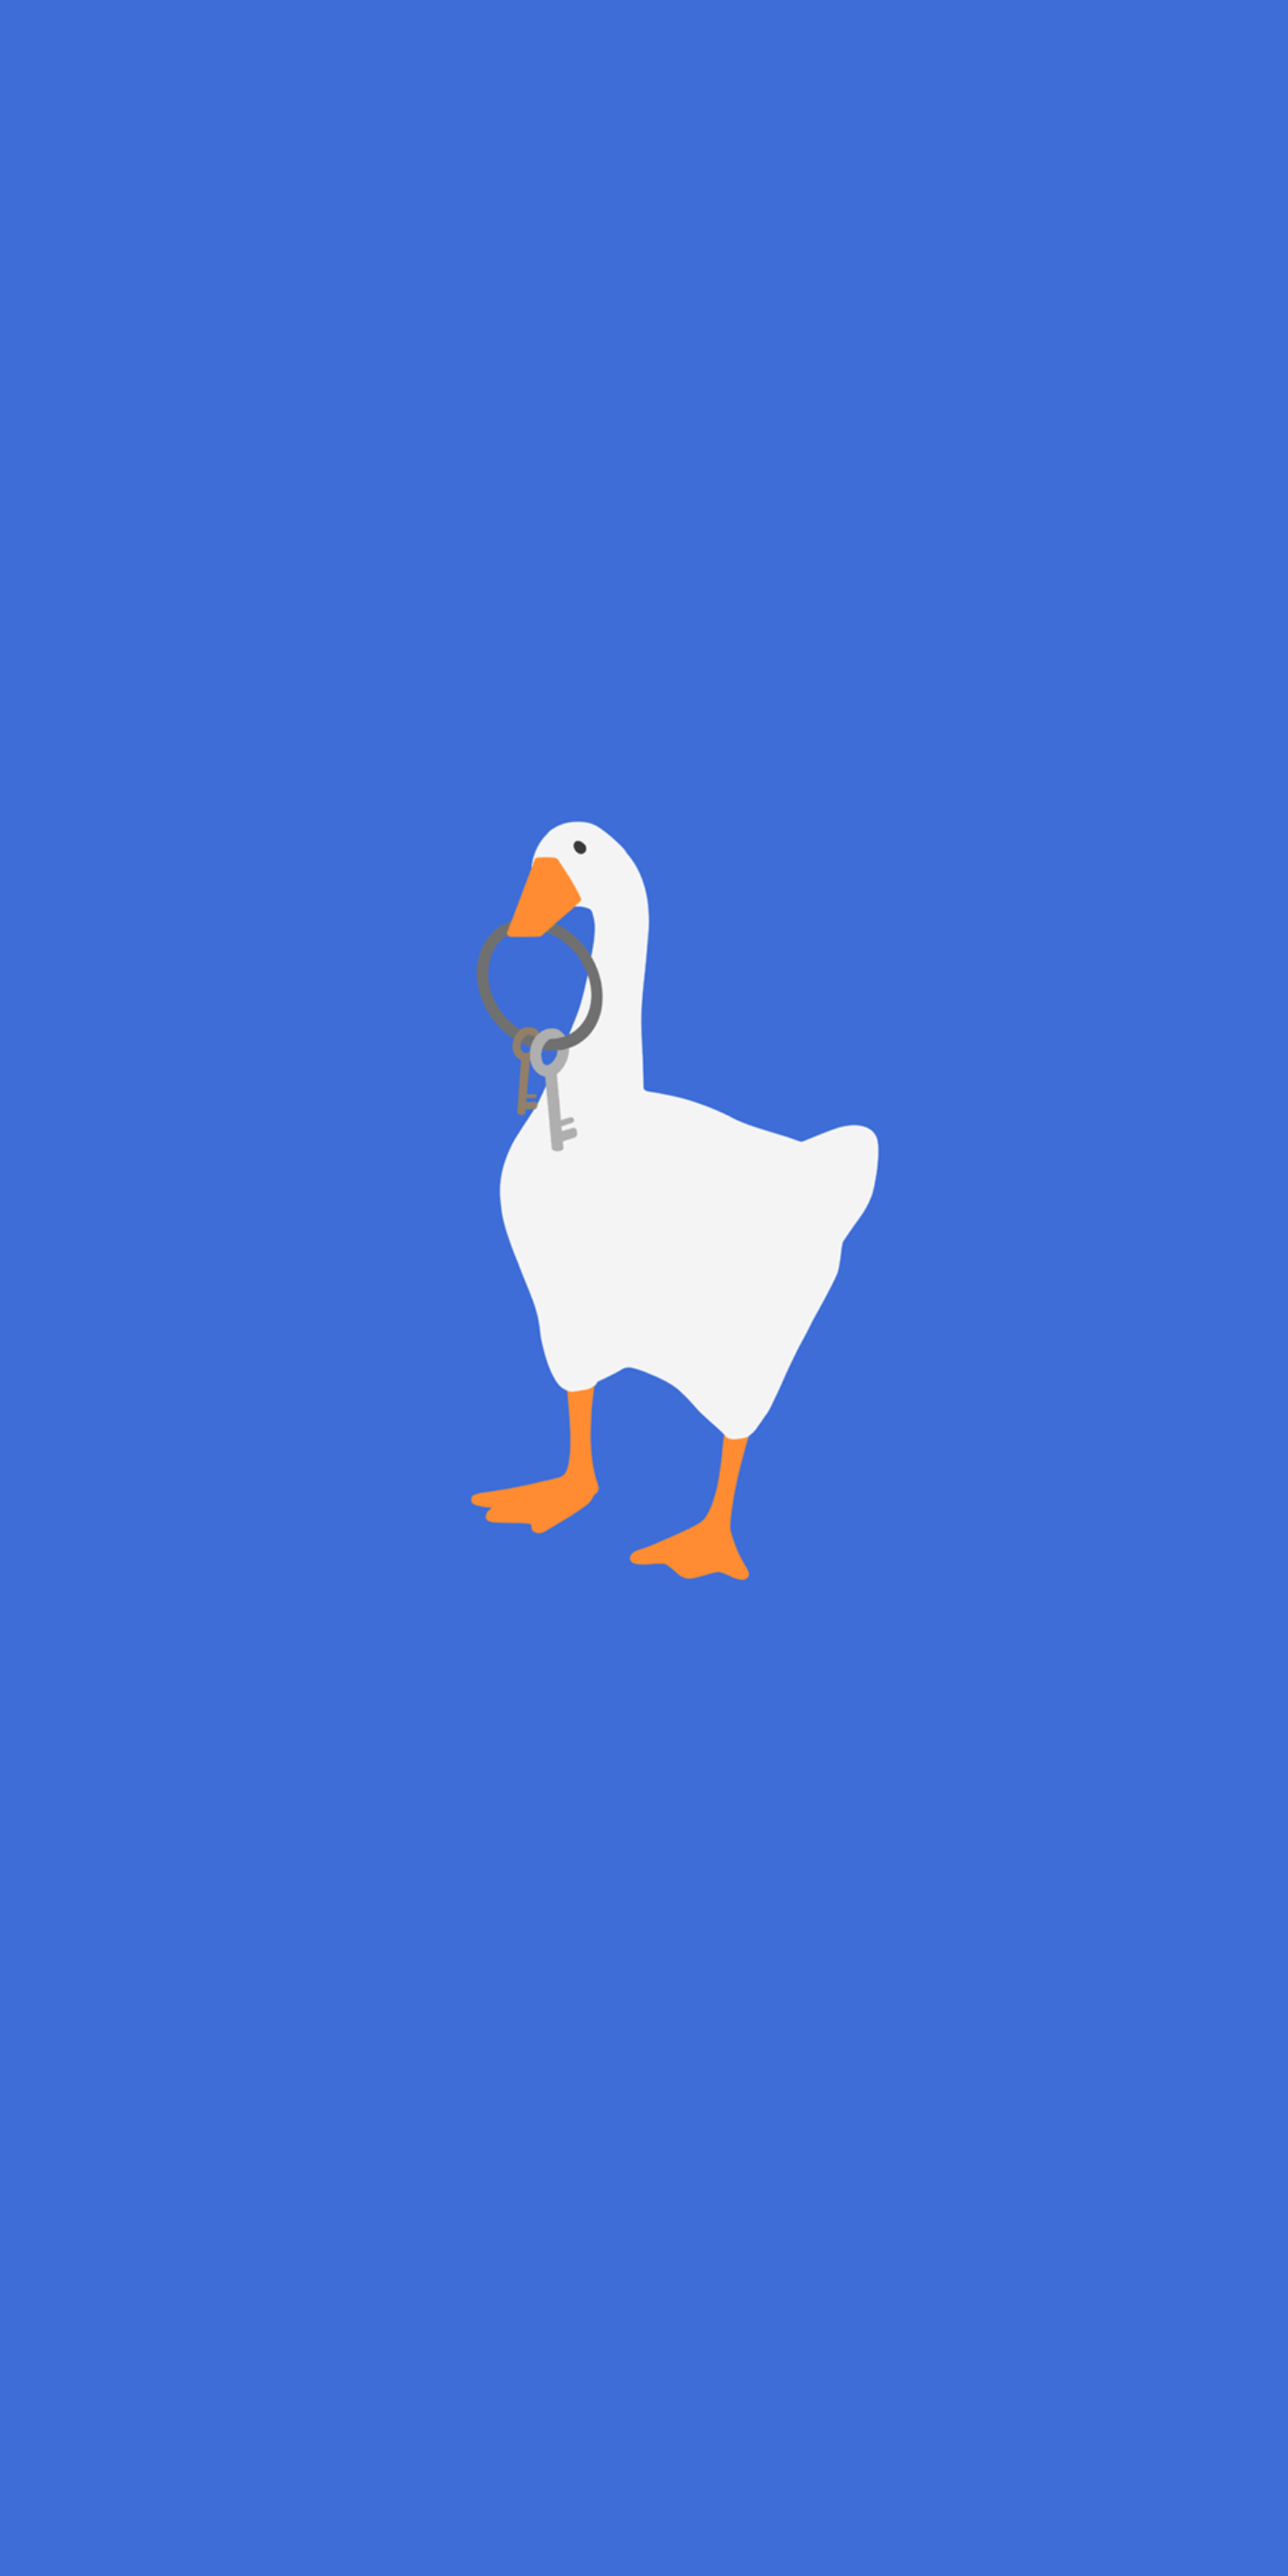 Repost I made this wallpaper of our favourite goose, Many